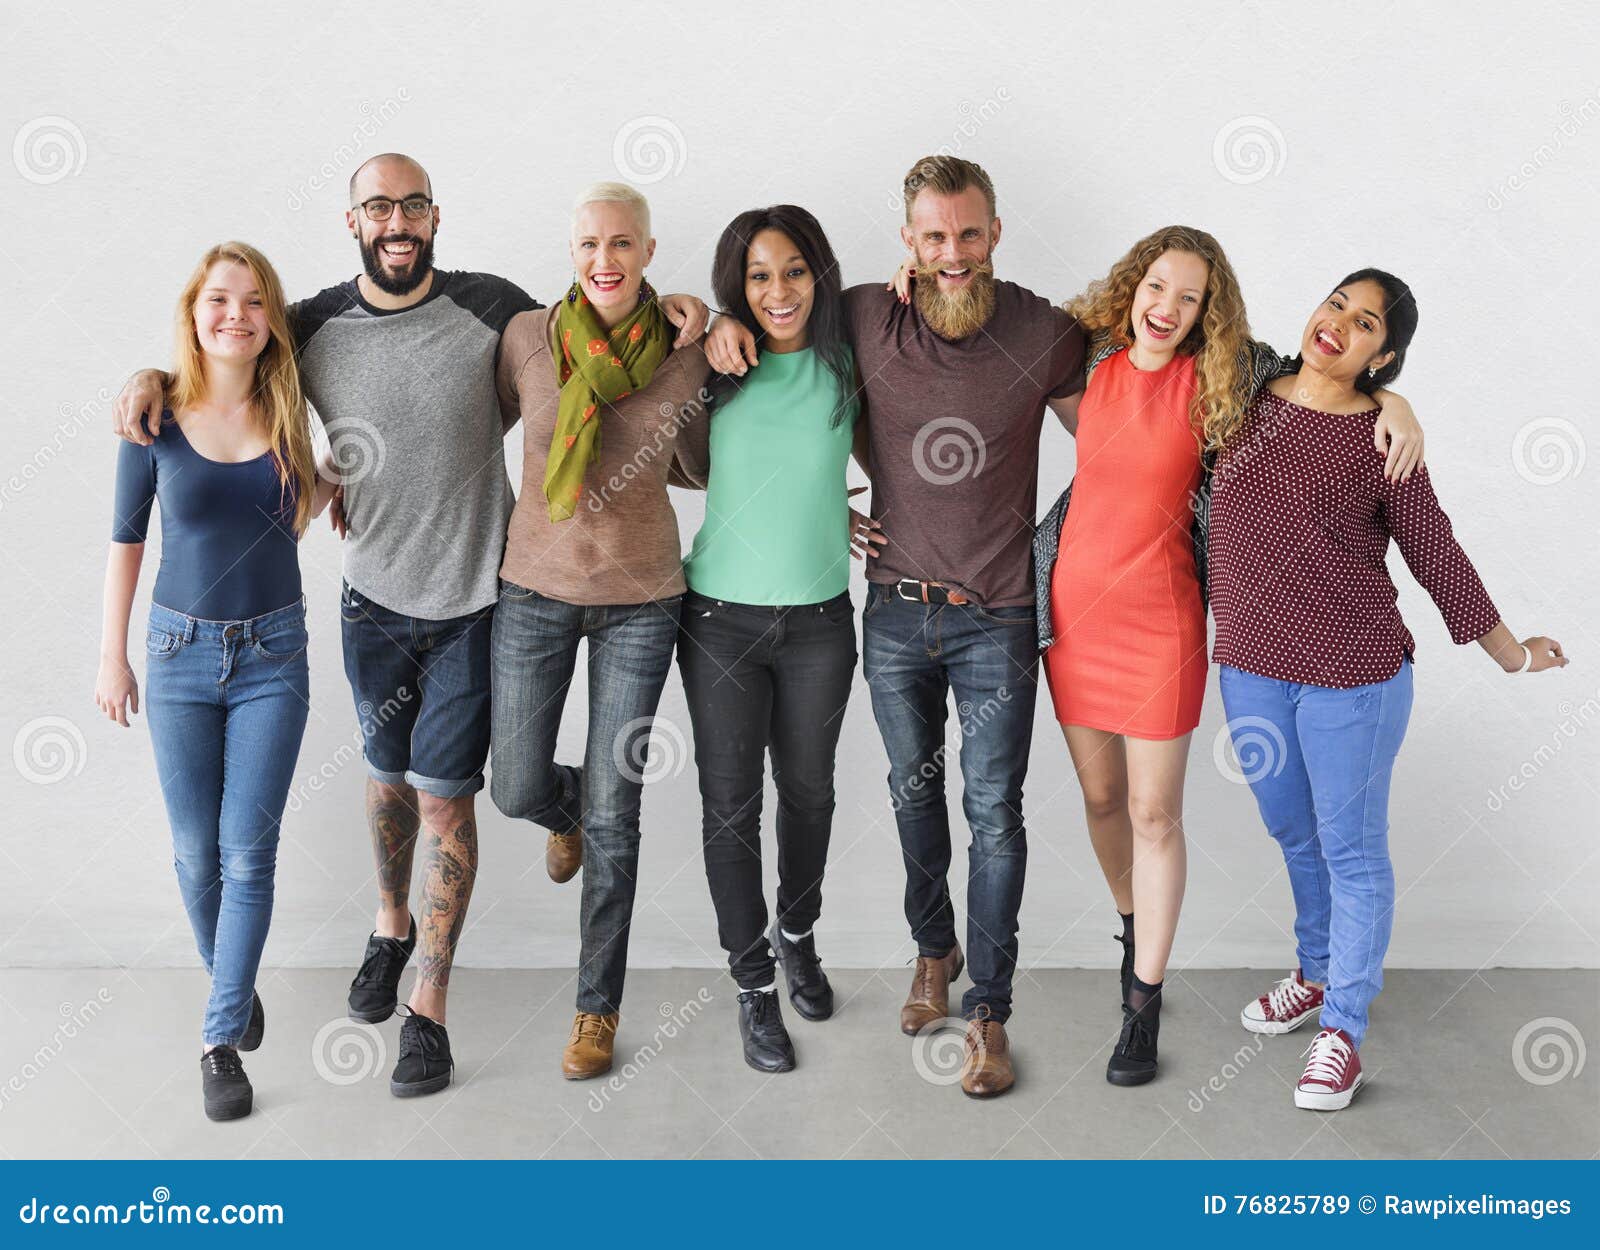 diverse group of people community togetherness concept